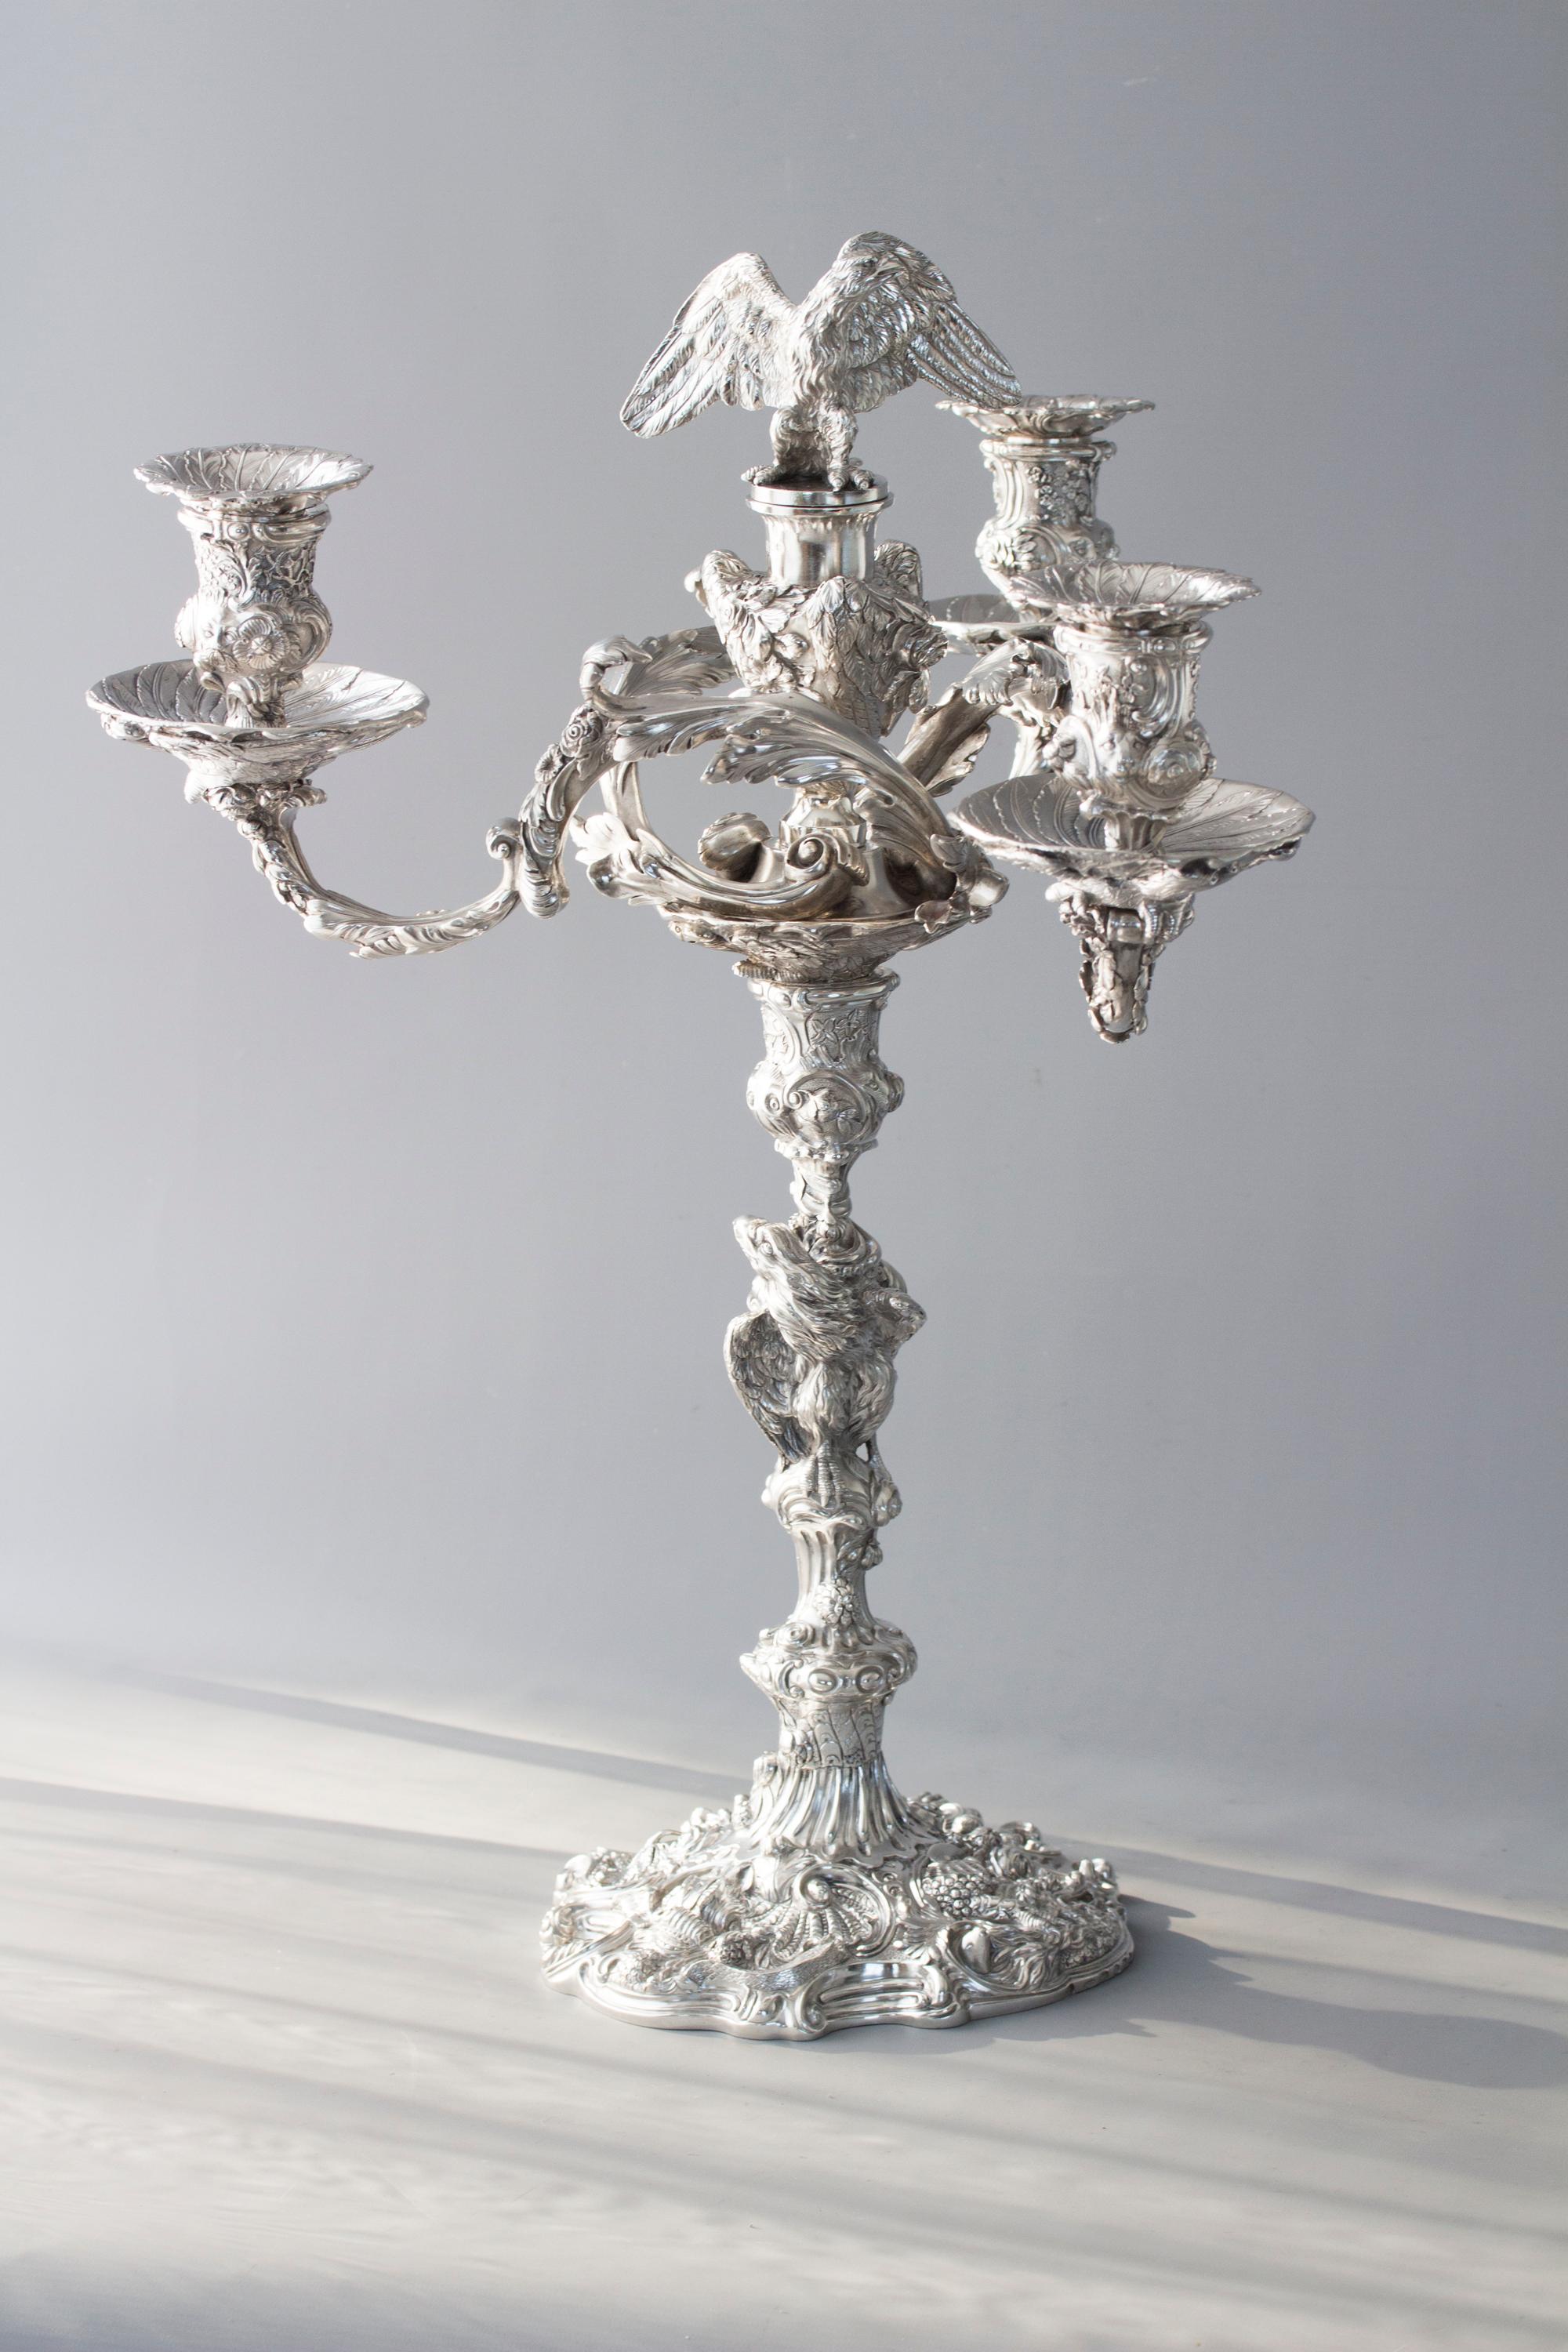 Impressive Pair of Cast Silver Four-Light Candelabra, London 1812 by W Pitts 1